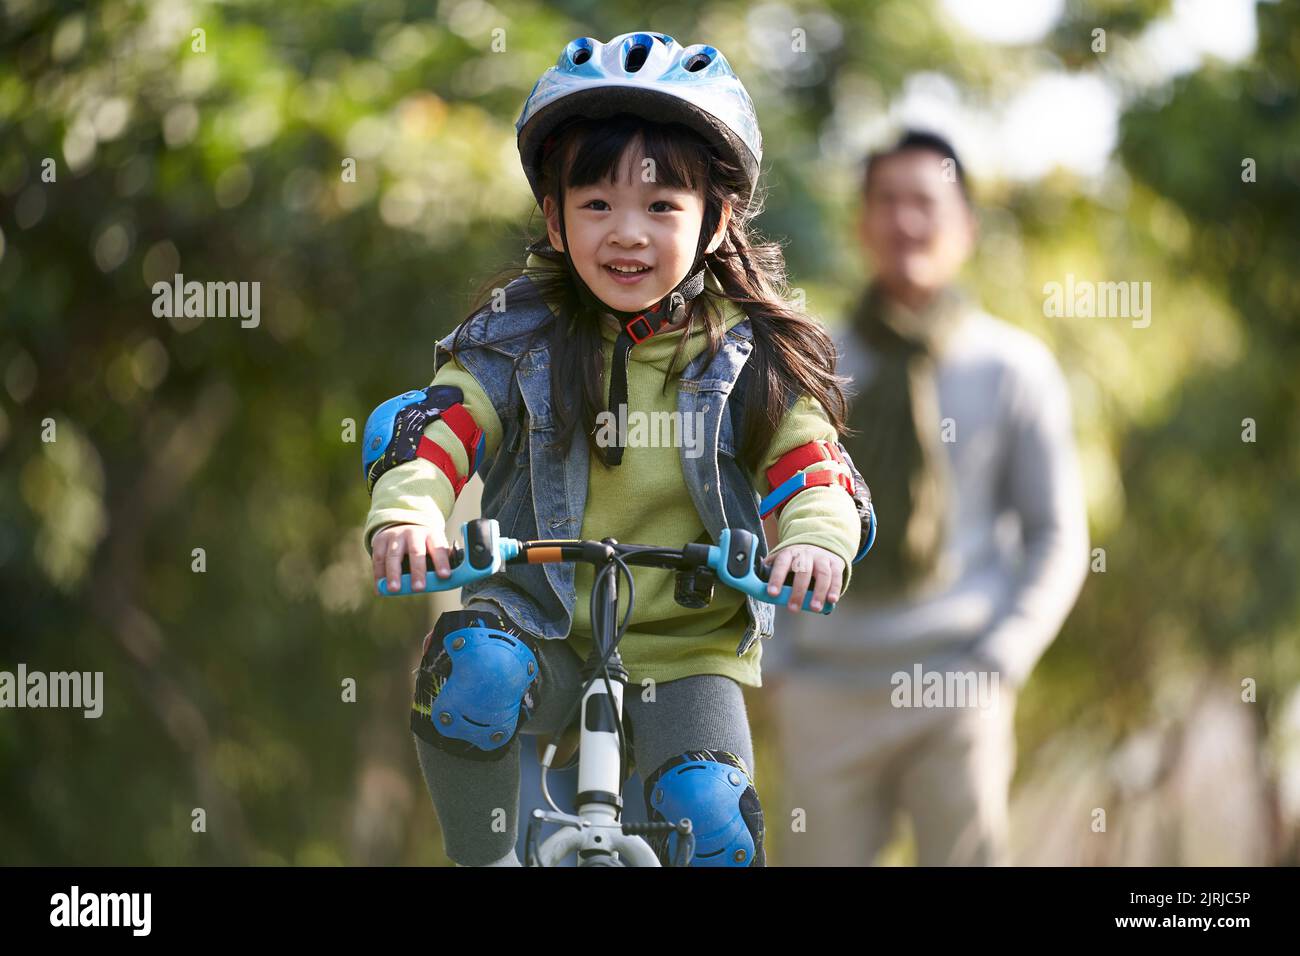 little asian girl with helmet and protection gear riding bike in city park with father watching from behind Stock Photo